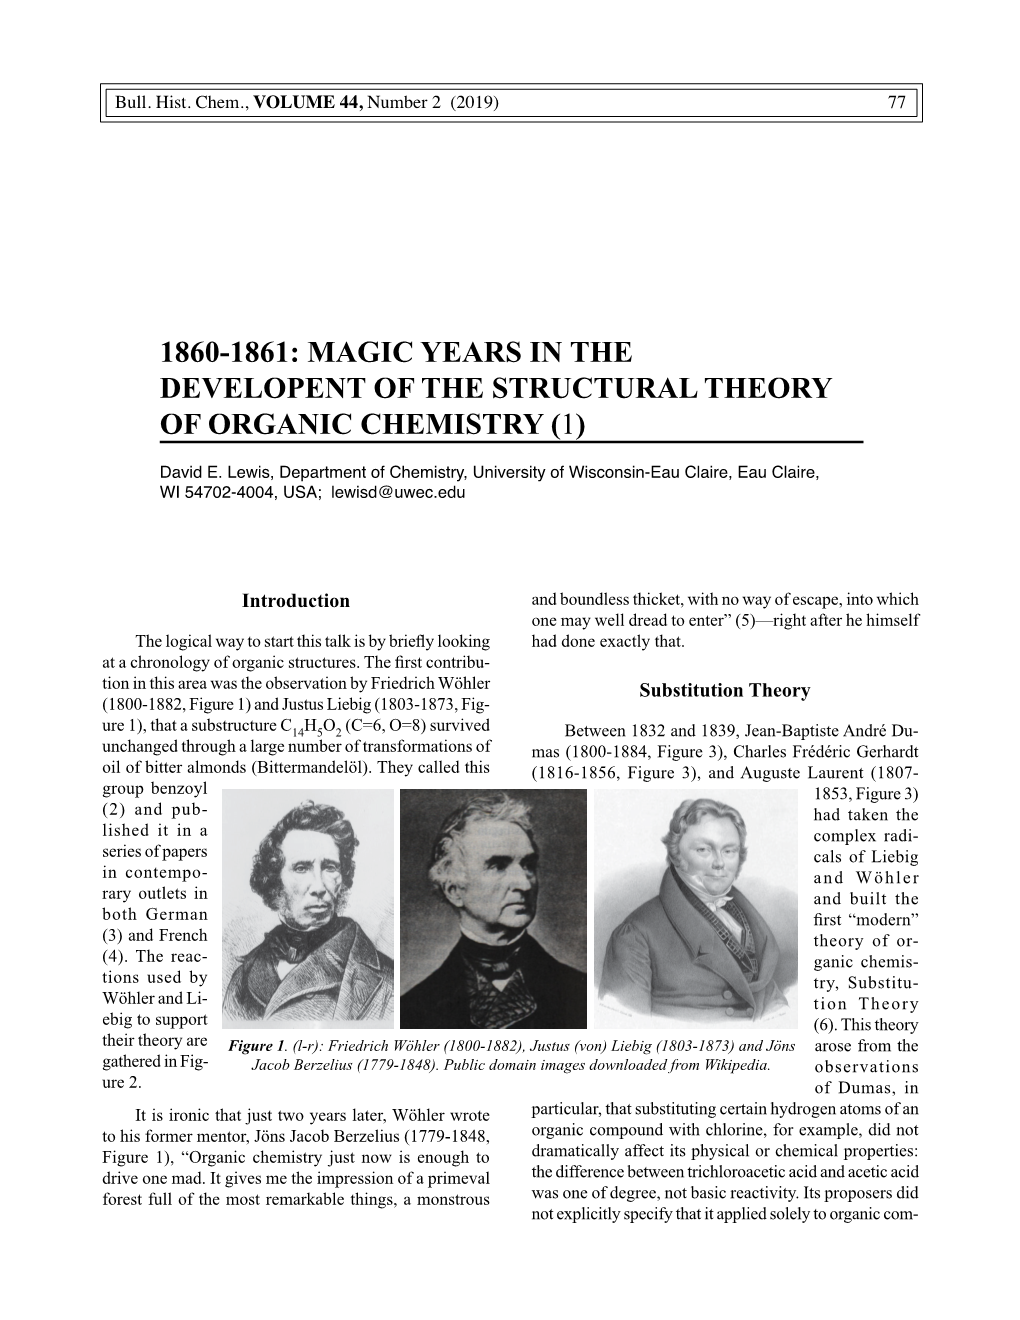 Magic Years in the Development of the Structural Theory of Organic